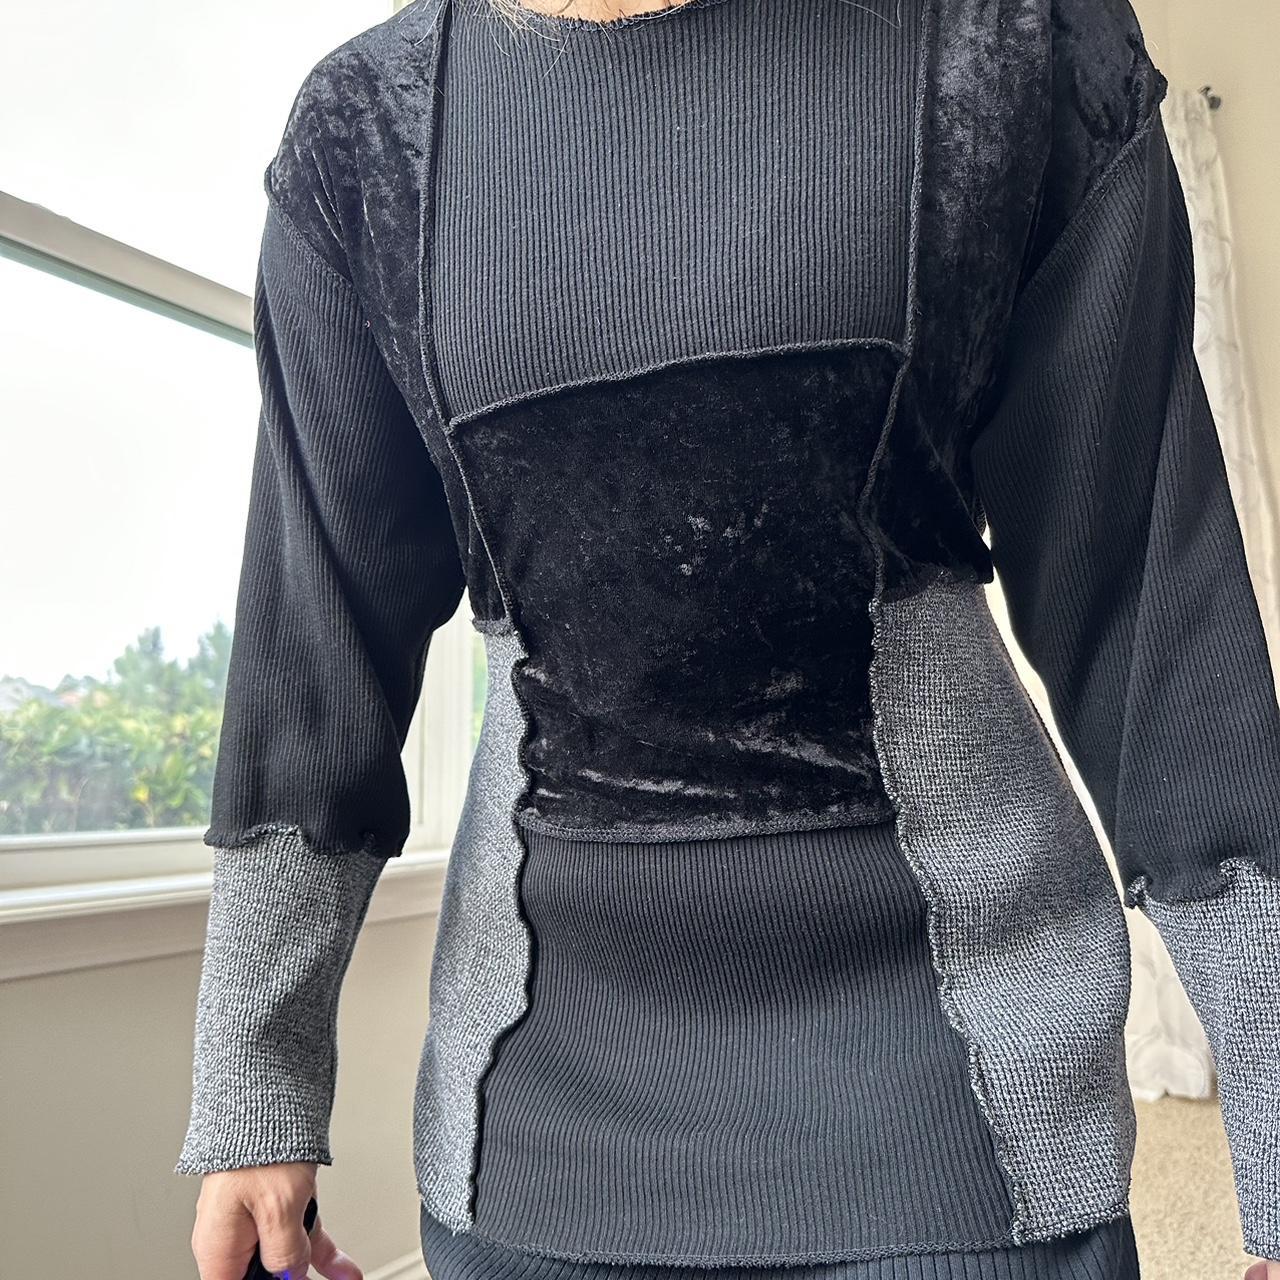 Chaus Women's Black and Grey Jumper